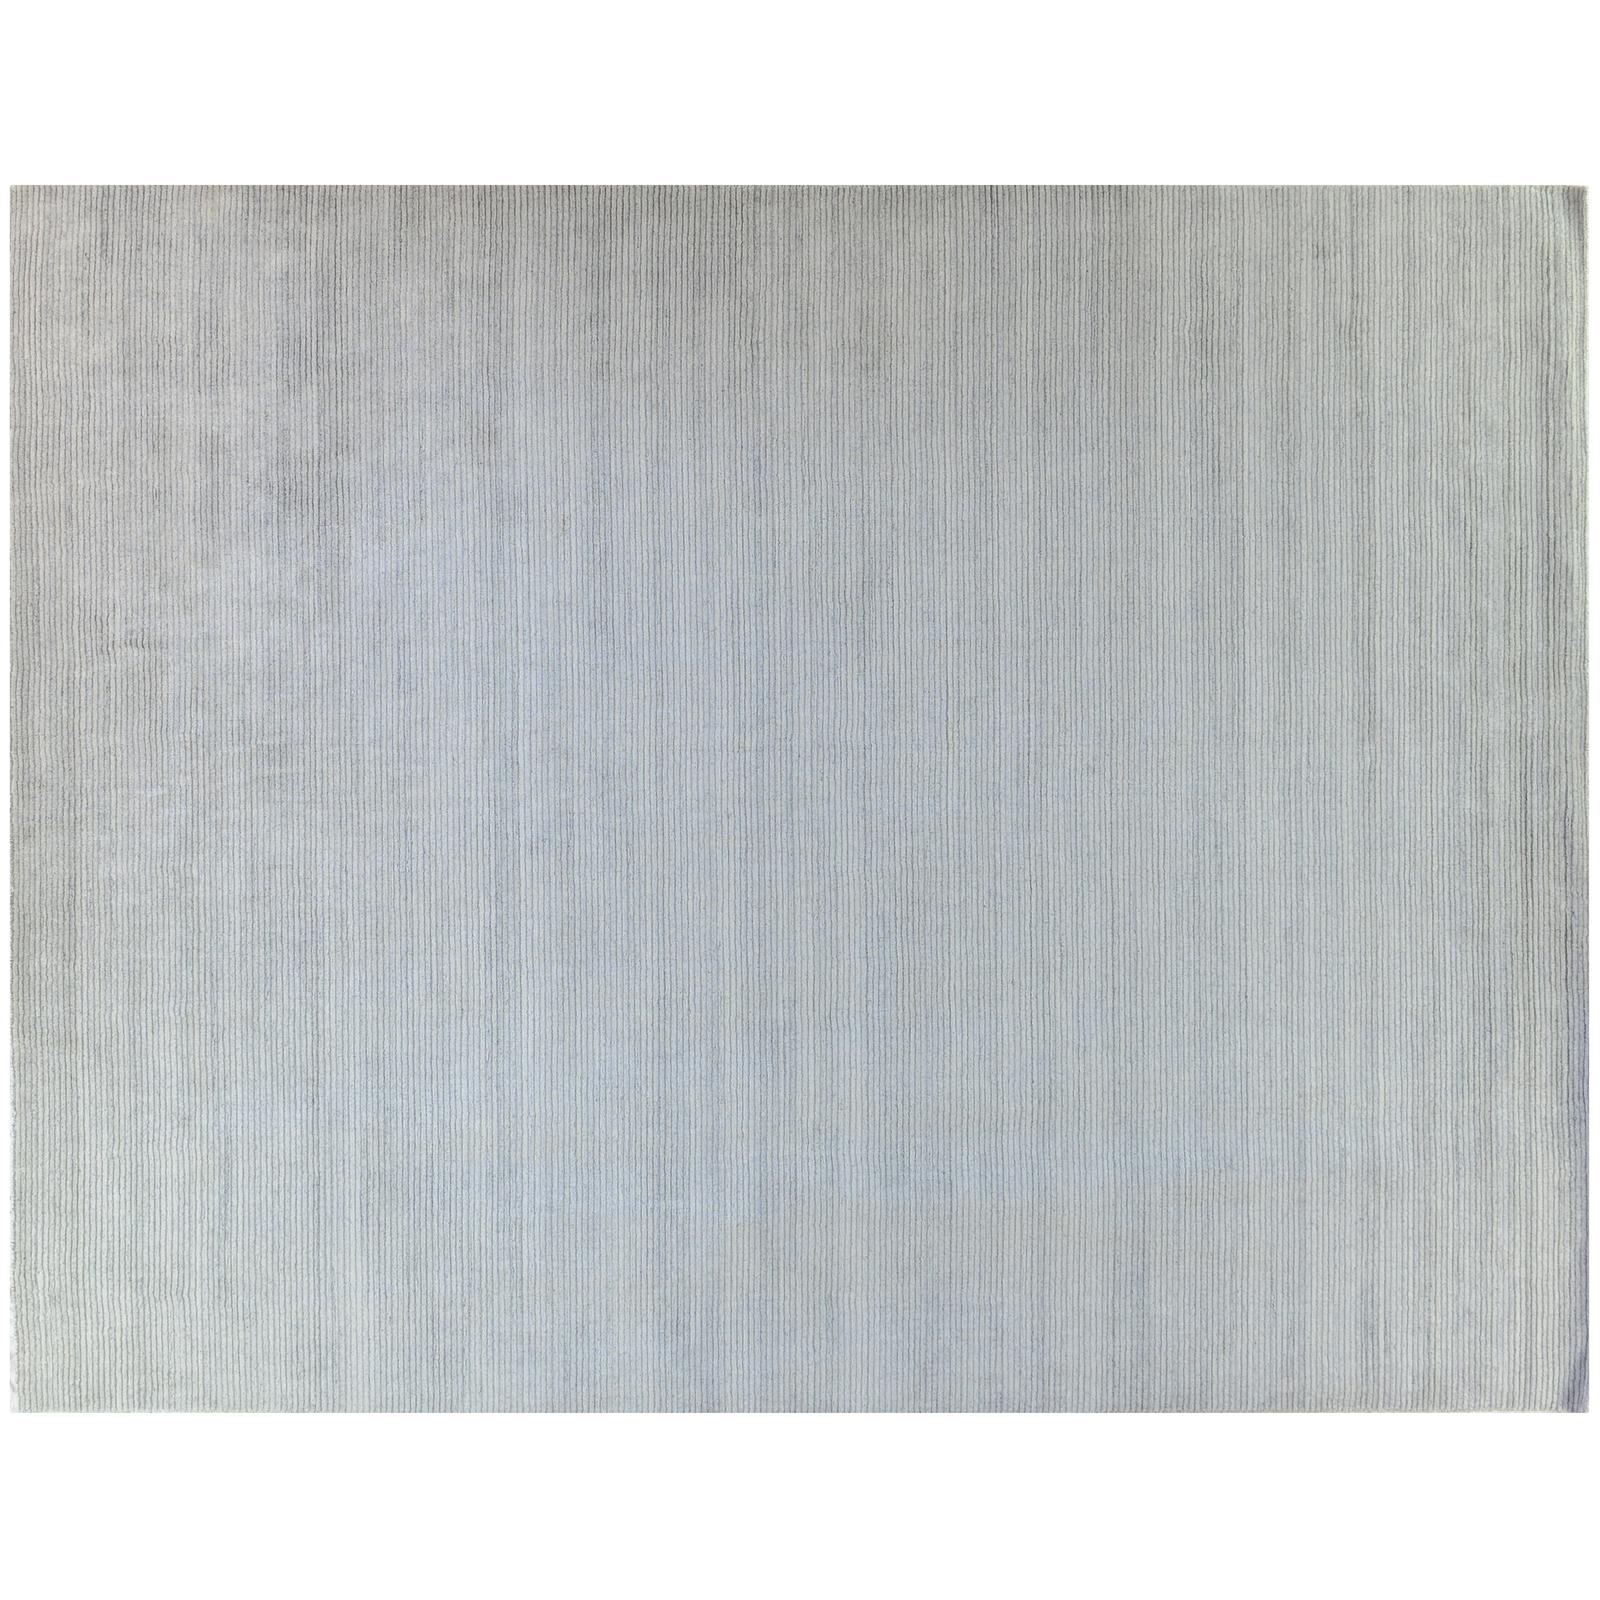 Ivory Stripe Wool Area Rug For Sale